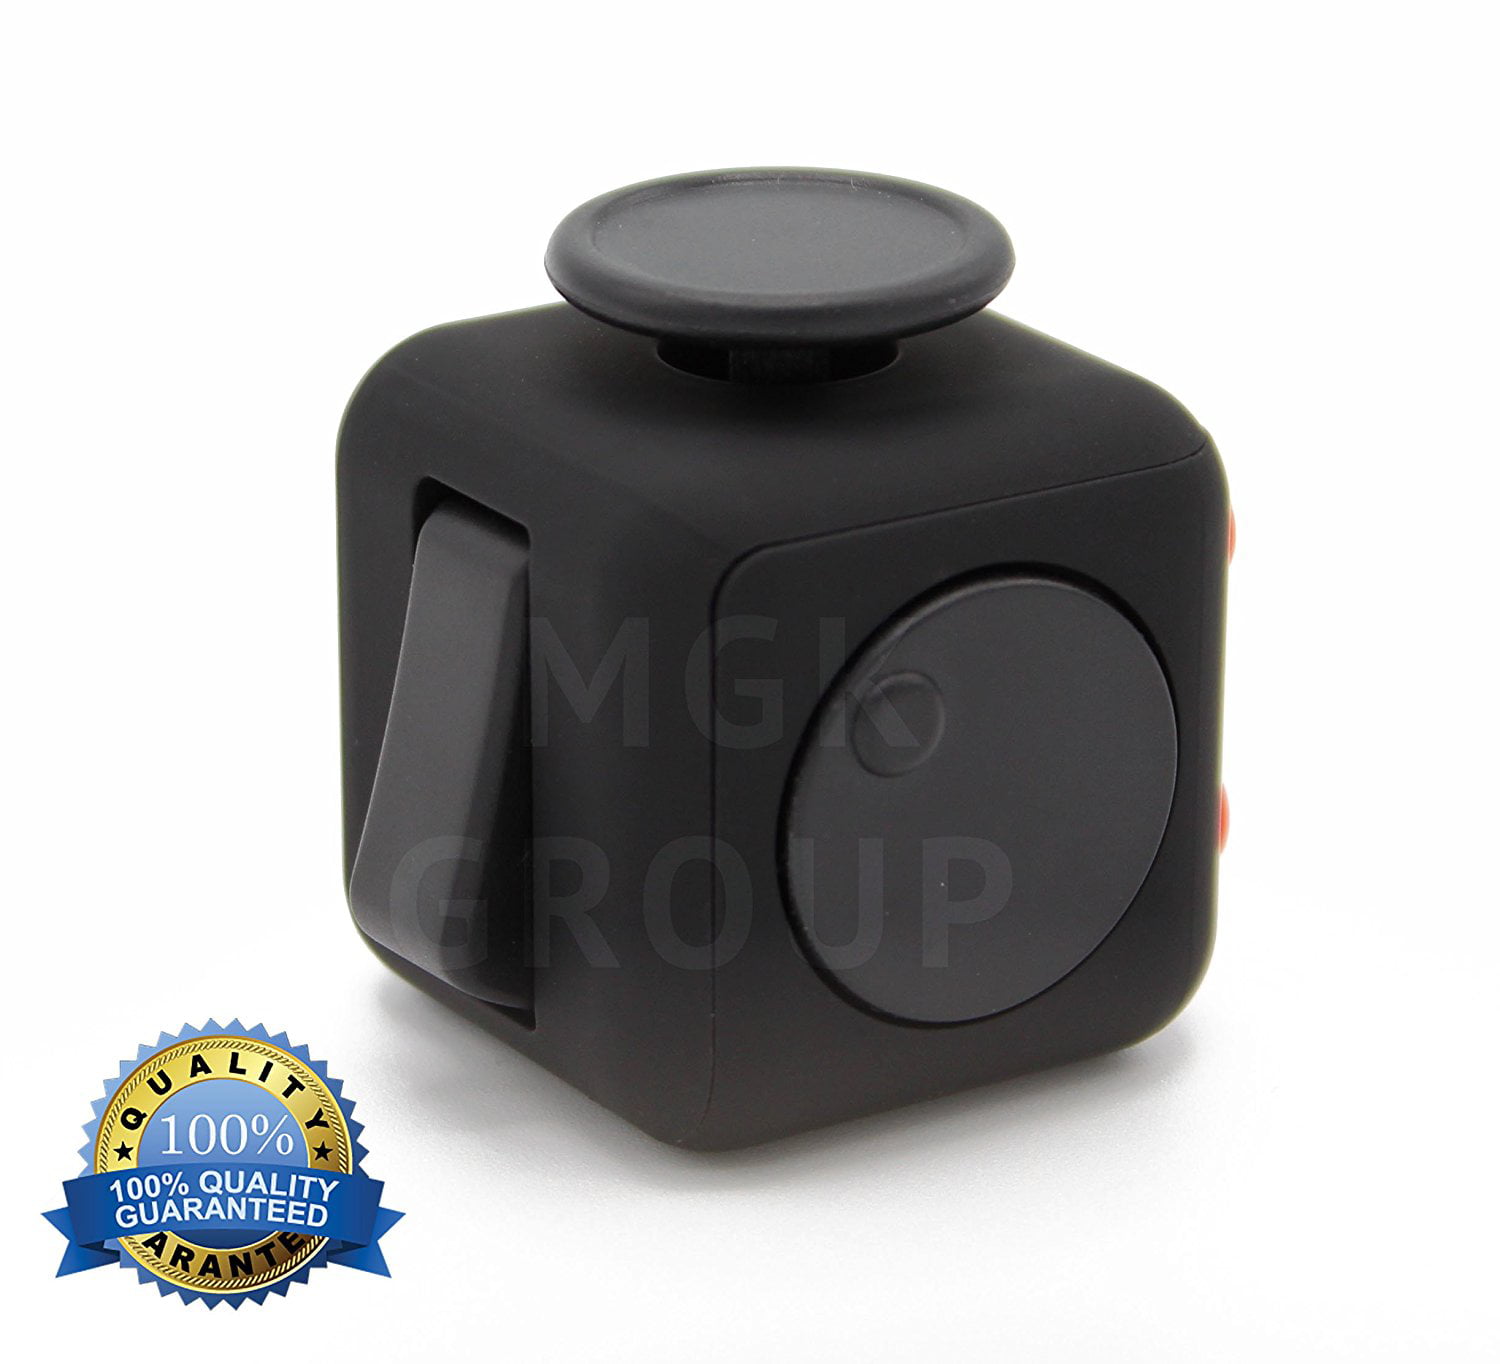 Fidget Cube For Fidgeters Relieve Stress Anxiety And Boredom For Children And Adults Black Color Walmart Com Walmart Com